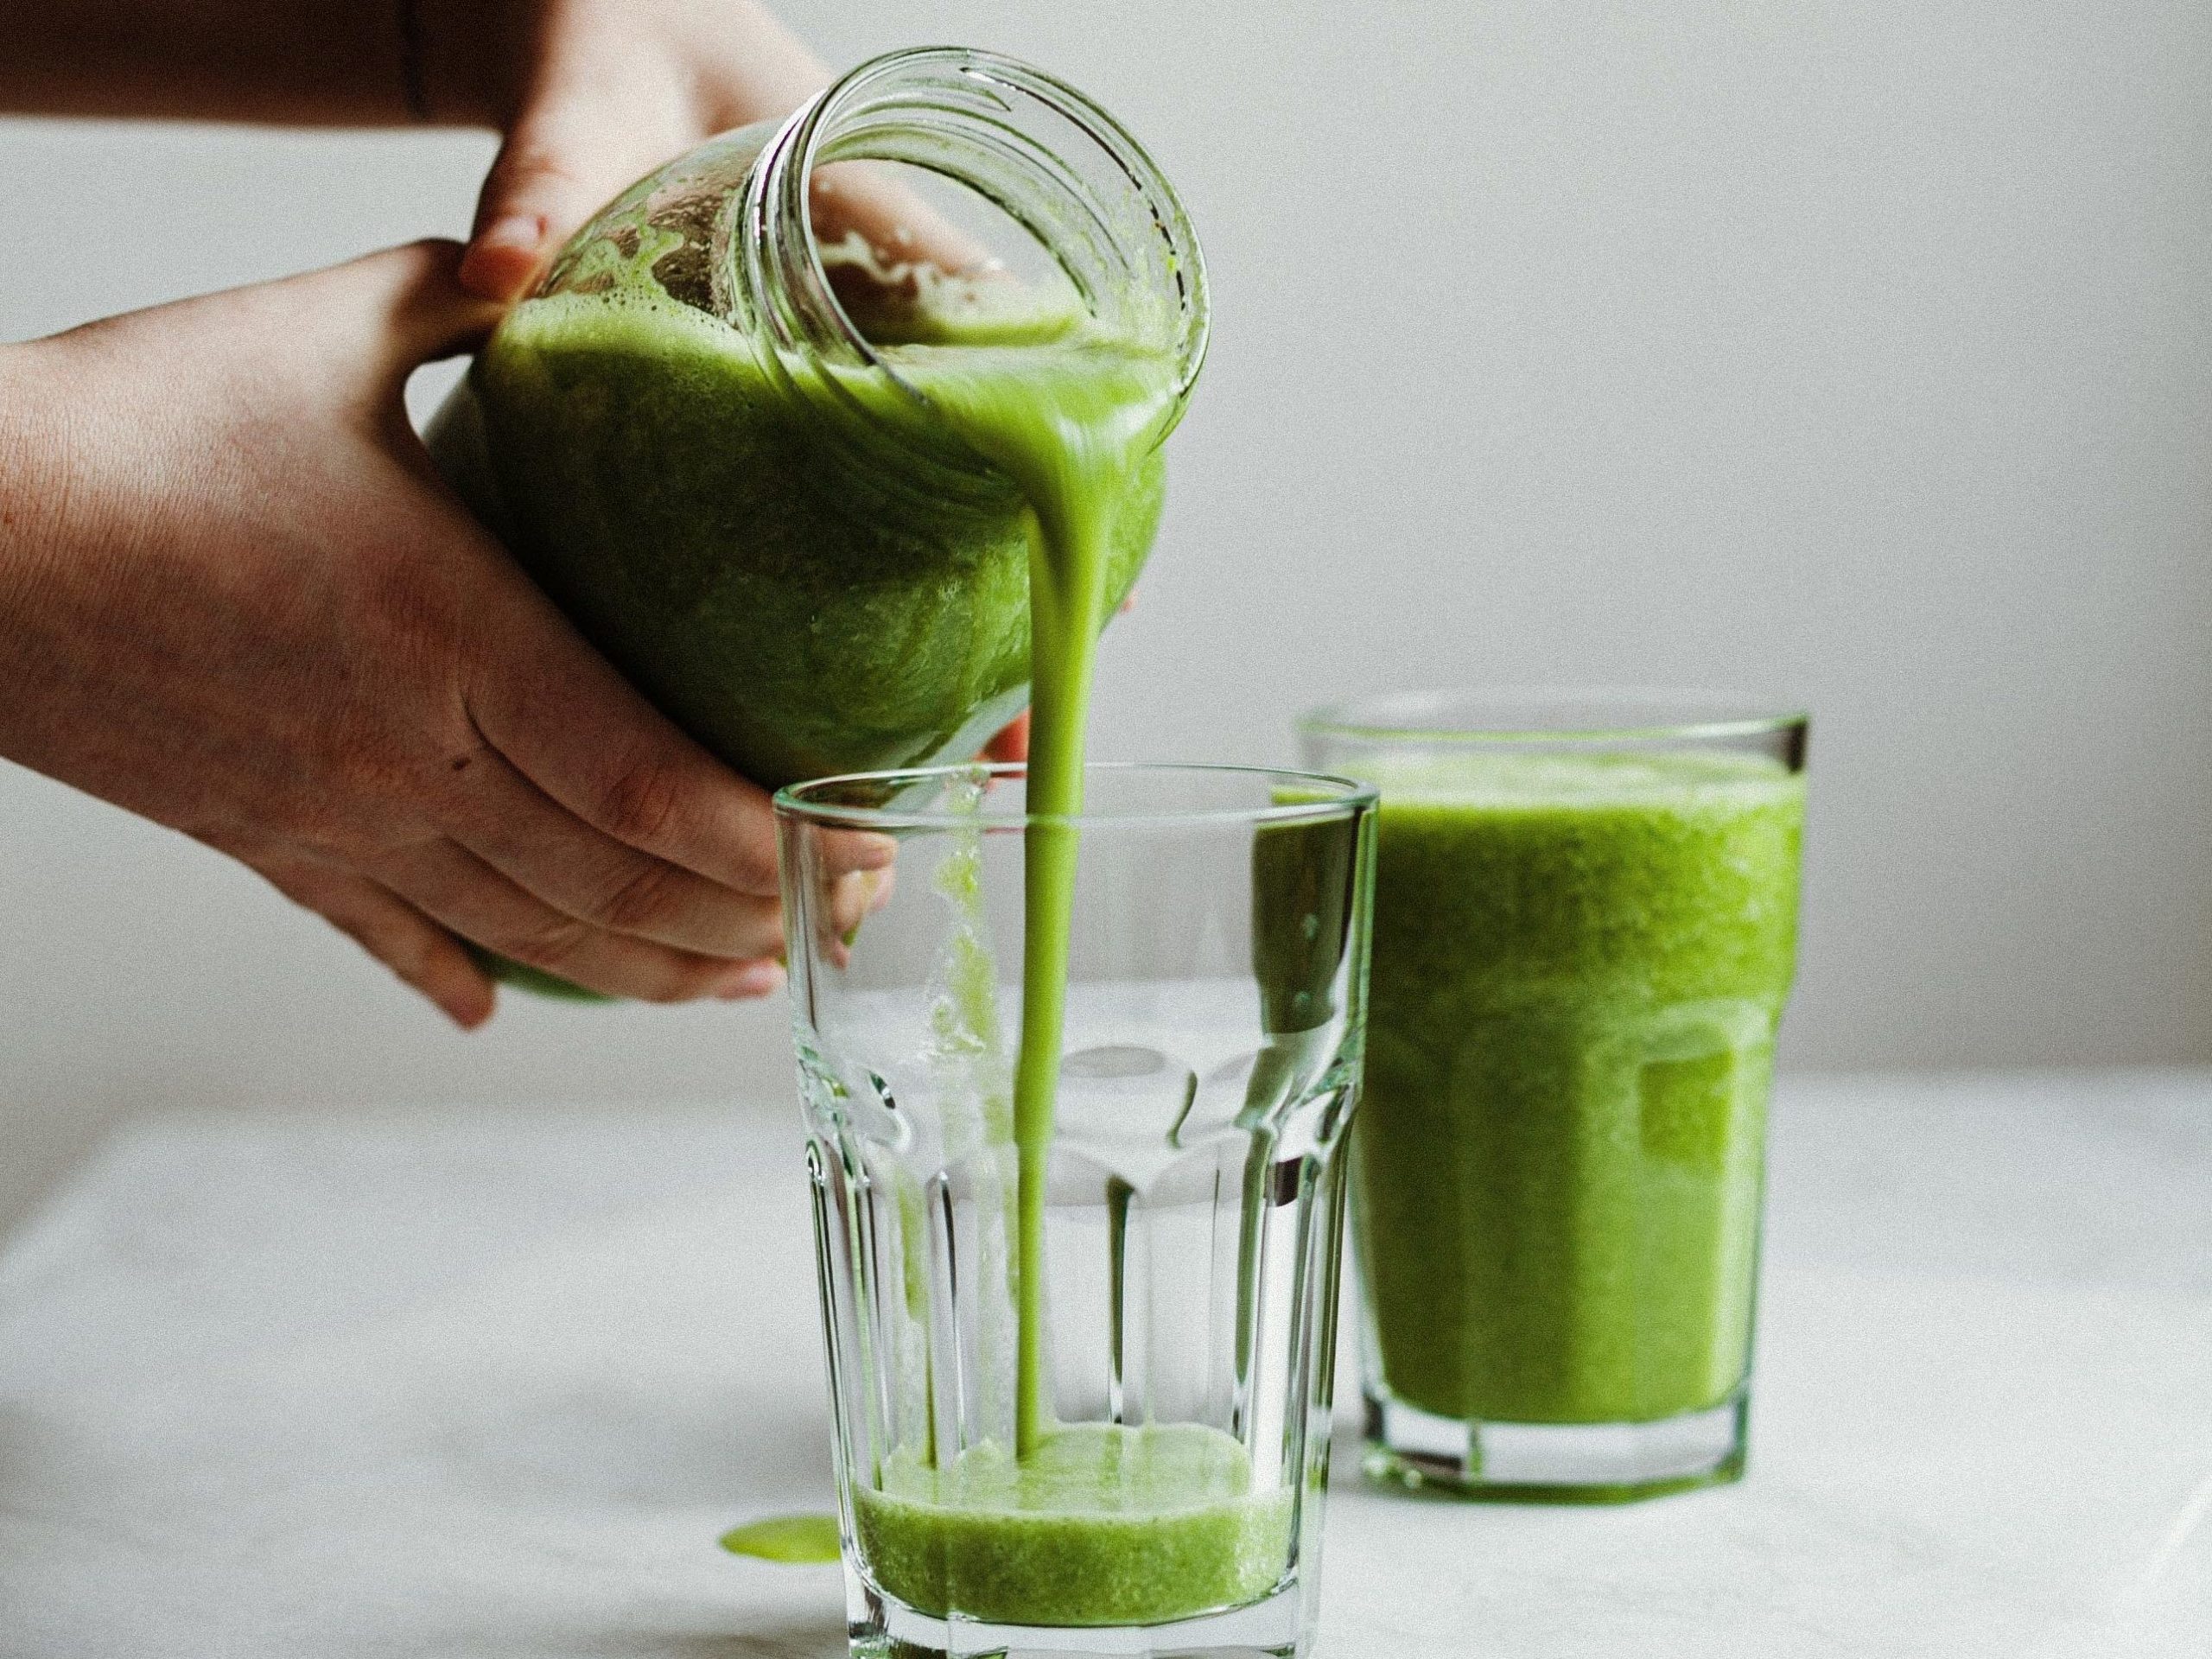 Get your health back on track by consuming more greens.